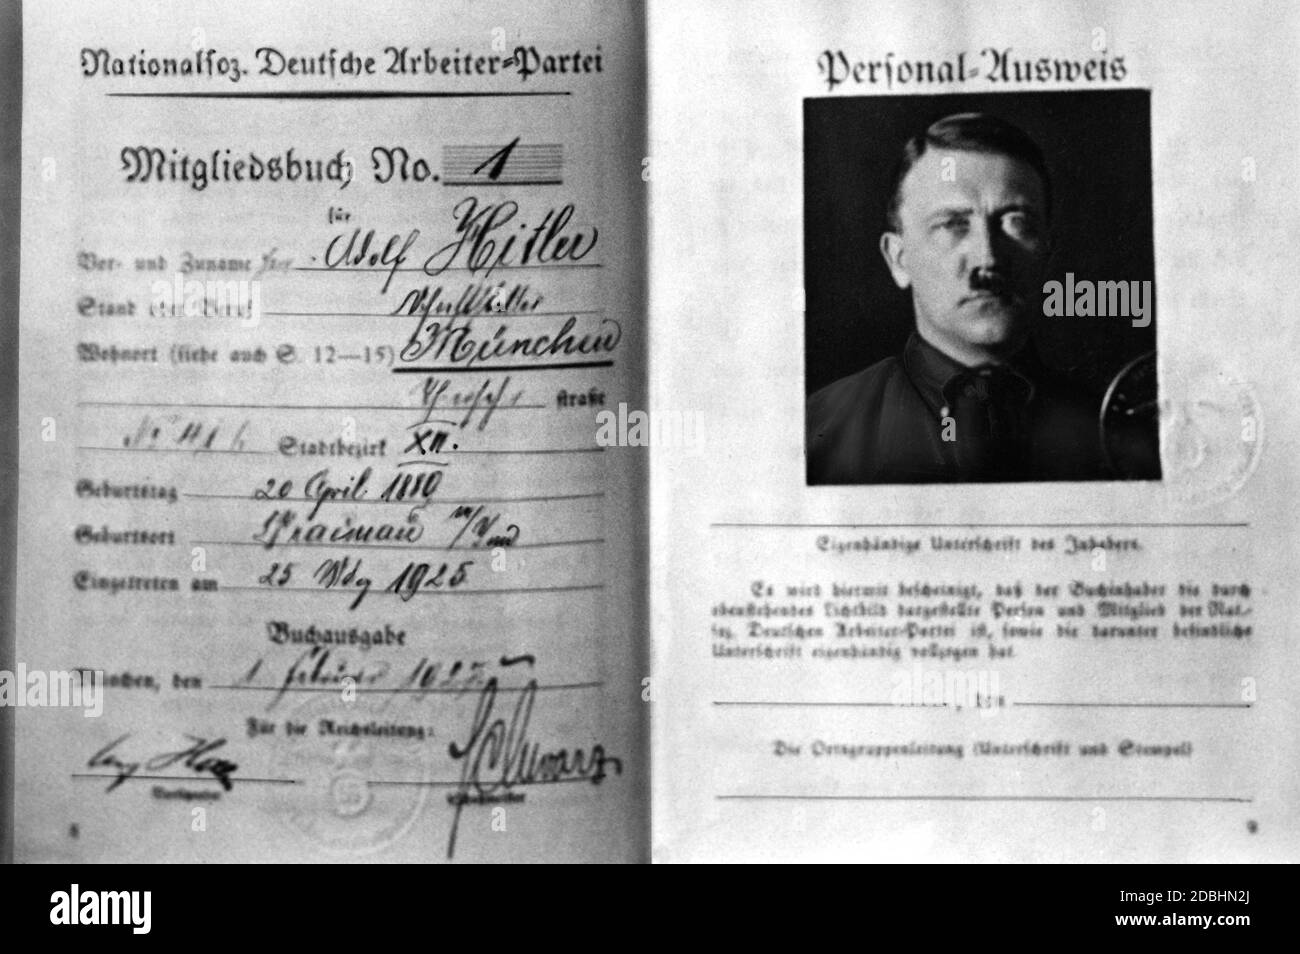 After the re-establishment of the NSDAP in 1925, Adolf Hitler received the membership book No. 1 after his imprisonment in Landsberg. Hitler received the membership number 1 only after his imprisonment, while he originally had the number 555. Stock Photo